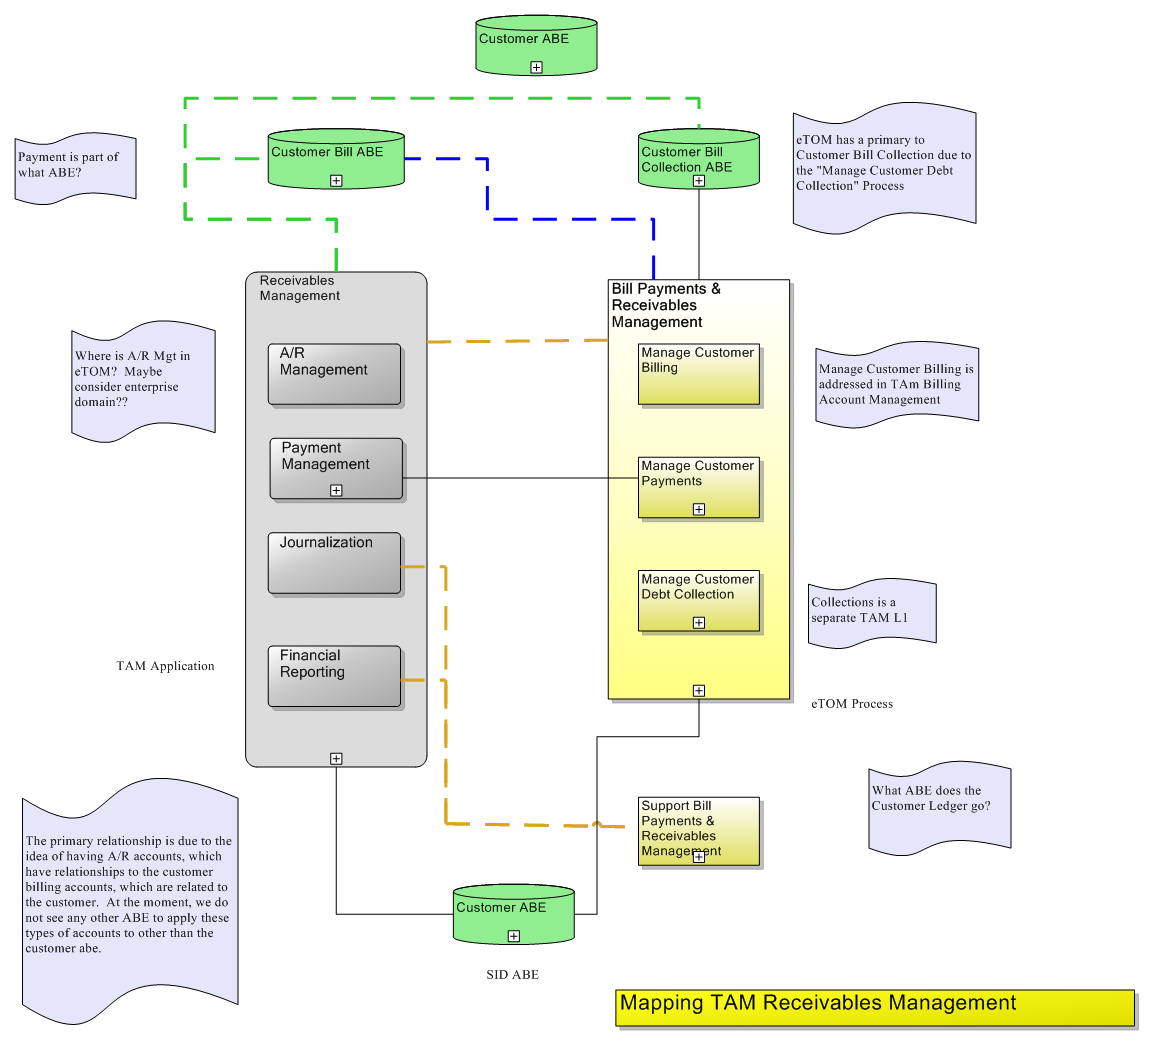 Mapping TAM Receivables Management